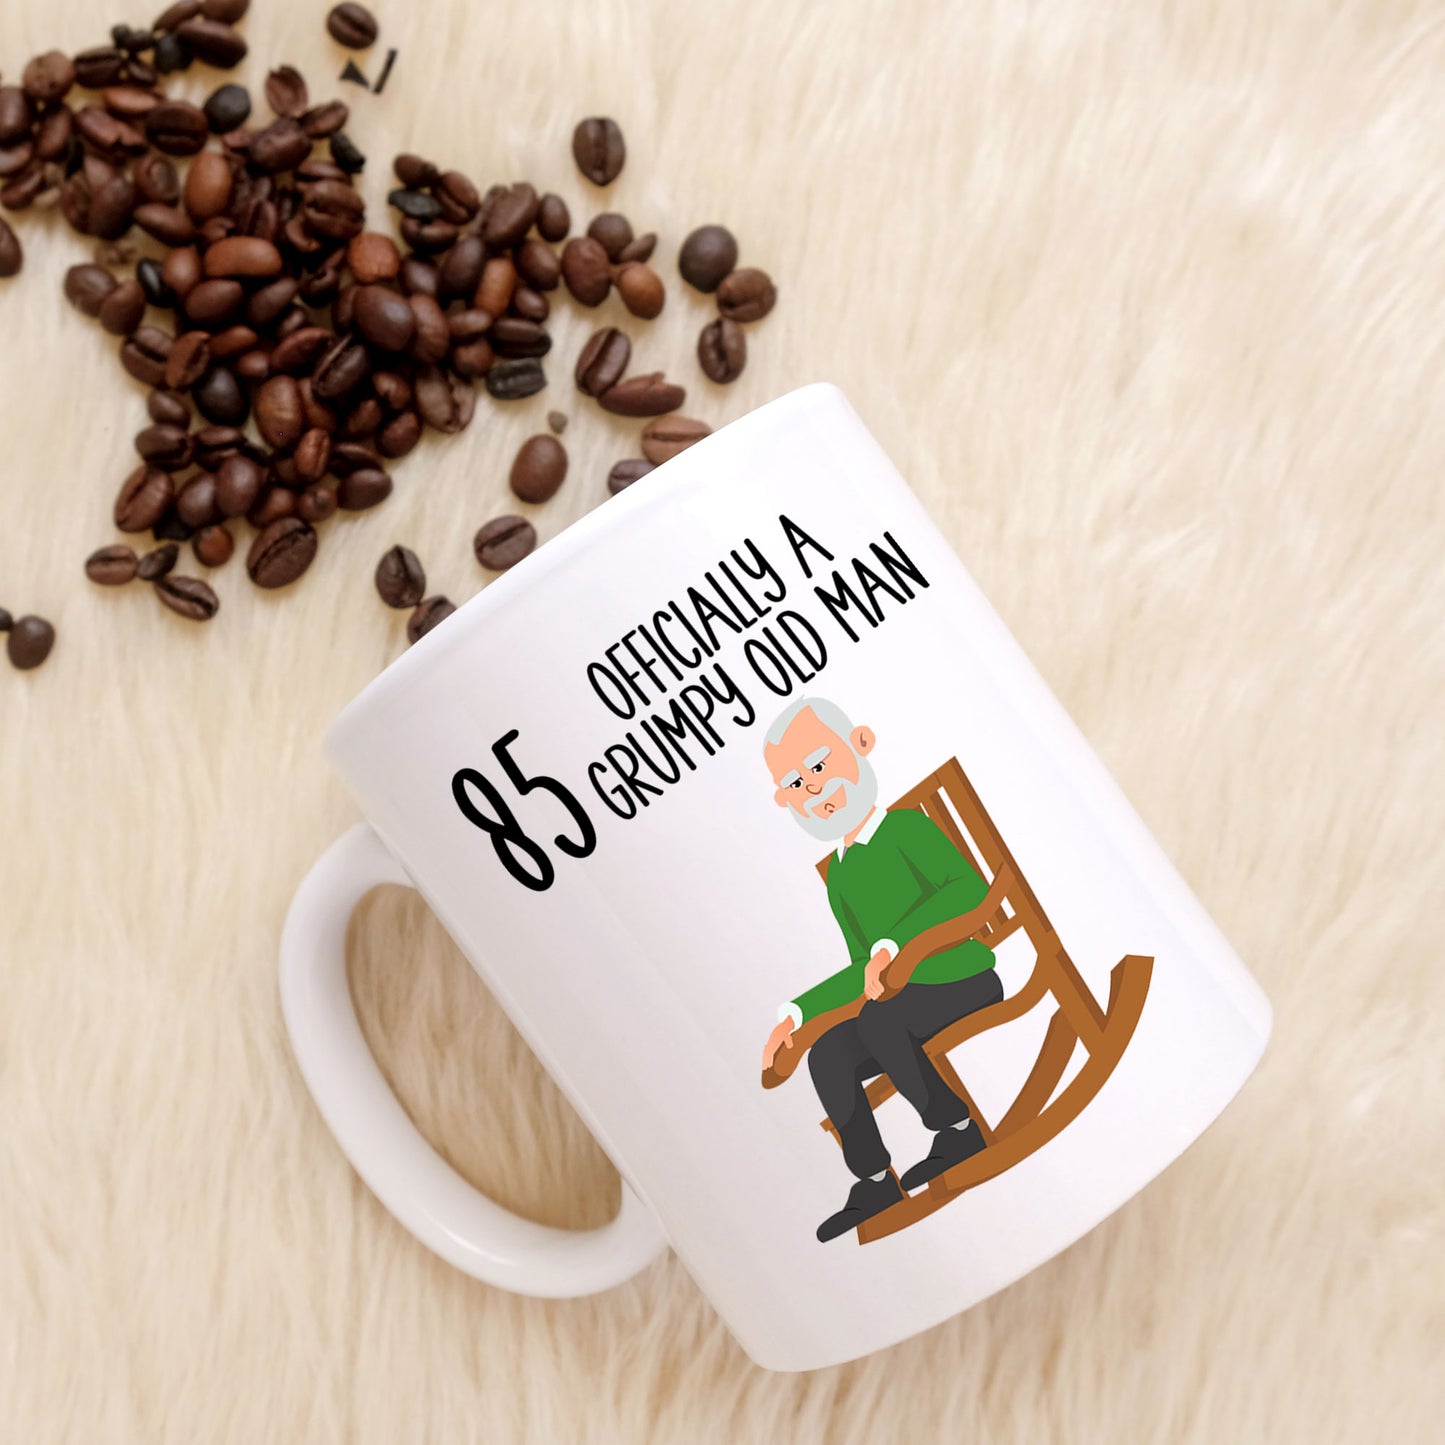 85 Officially A Grumpy Old Man Mug and/or Coaster Gift  - Always Looking Good -   